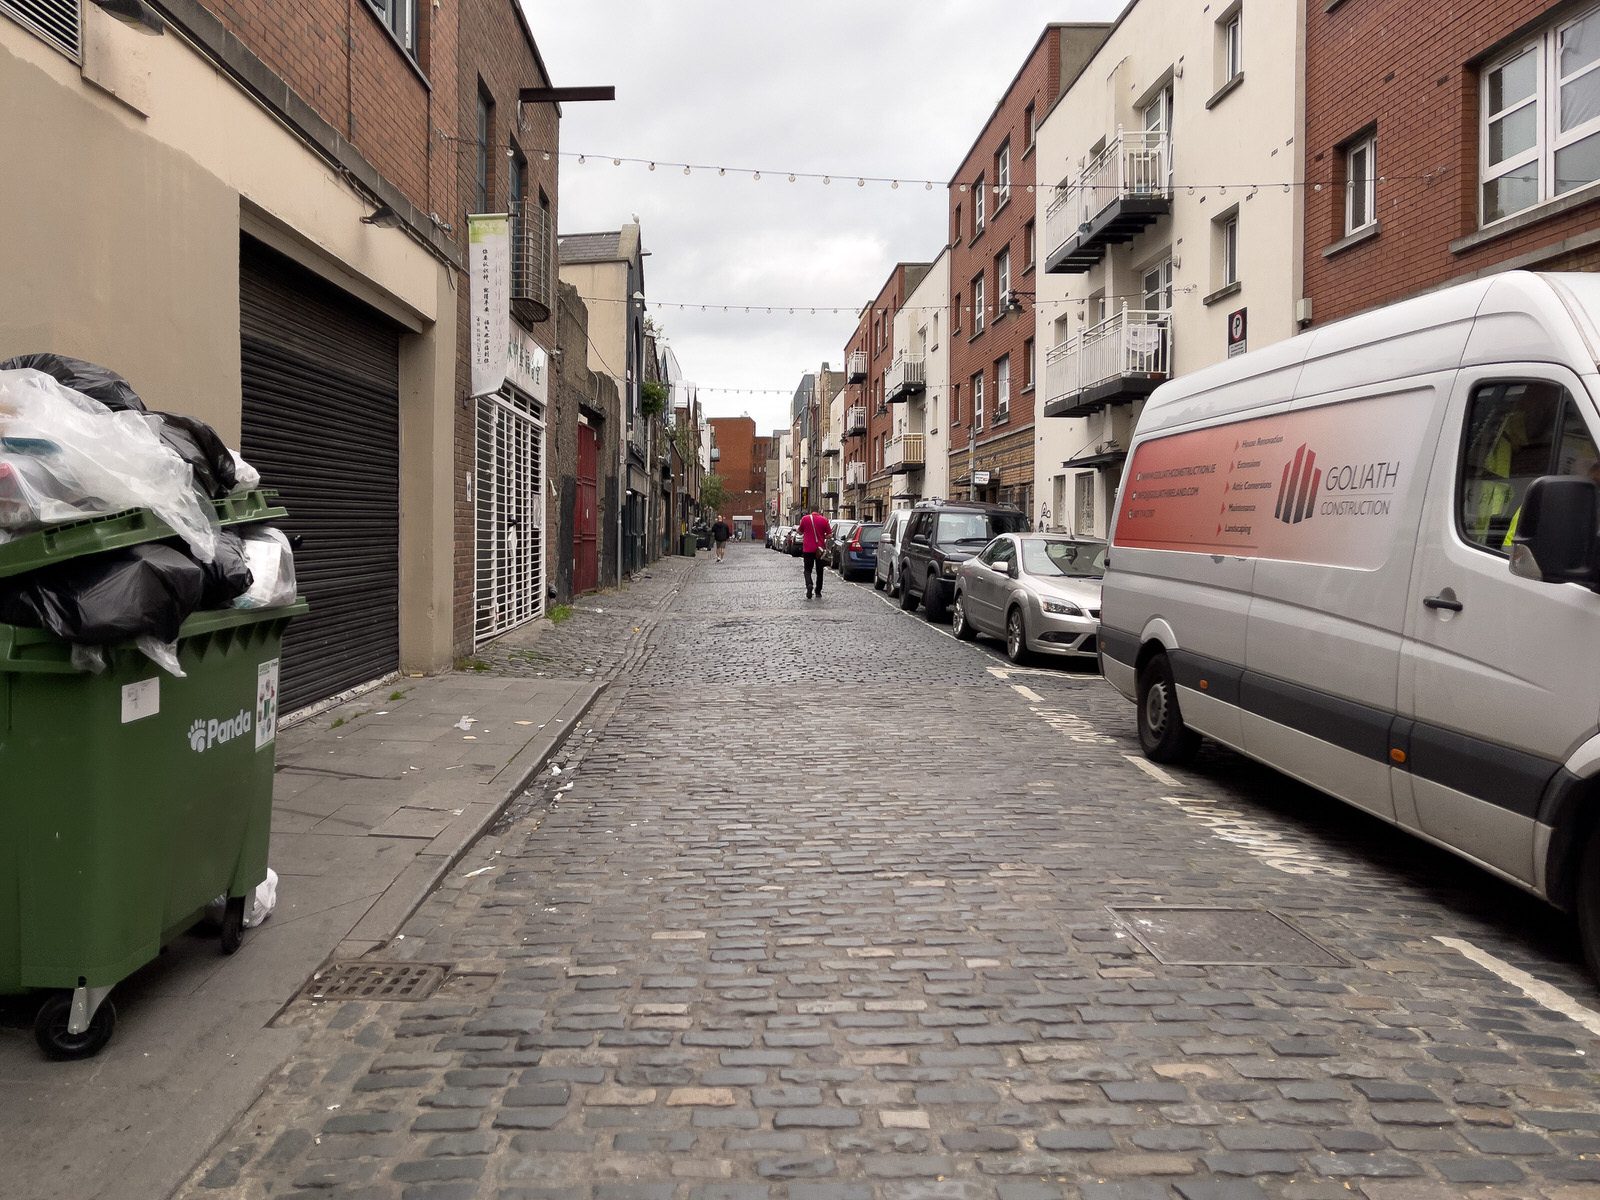 THE STREET SIGN SAYS NORTH LOTTS [A HISTORIC AREA OF DUBLIN]--225687-1